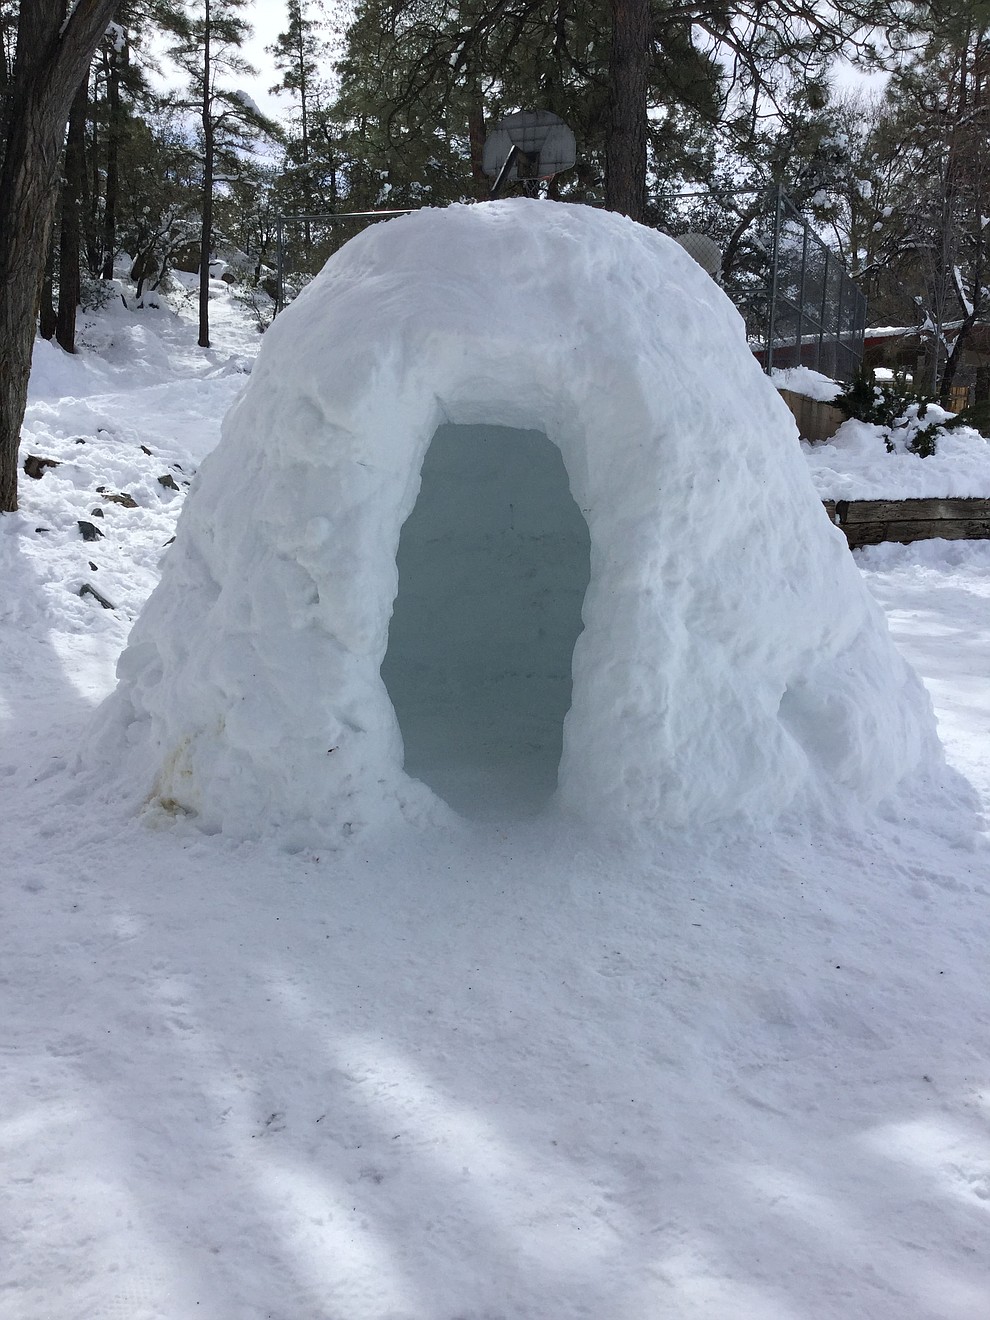 Flinn Park in Linwood Ave in Prescott.Saturday Fun In The Park.Teenagers haveing fun after the storm..A cozy about 6 ft. Igloo